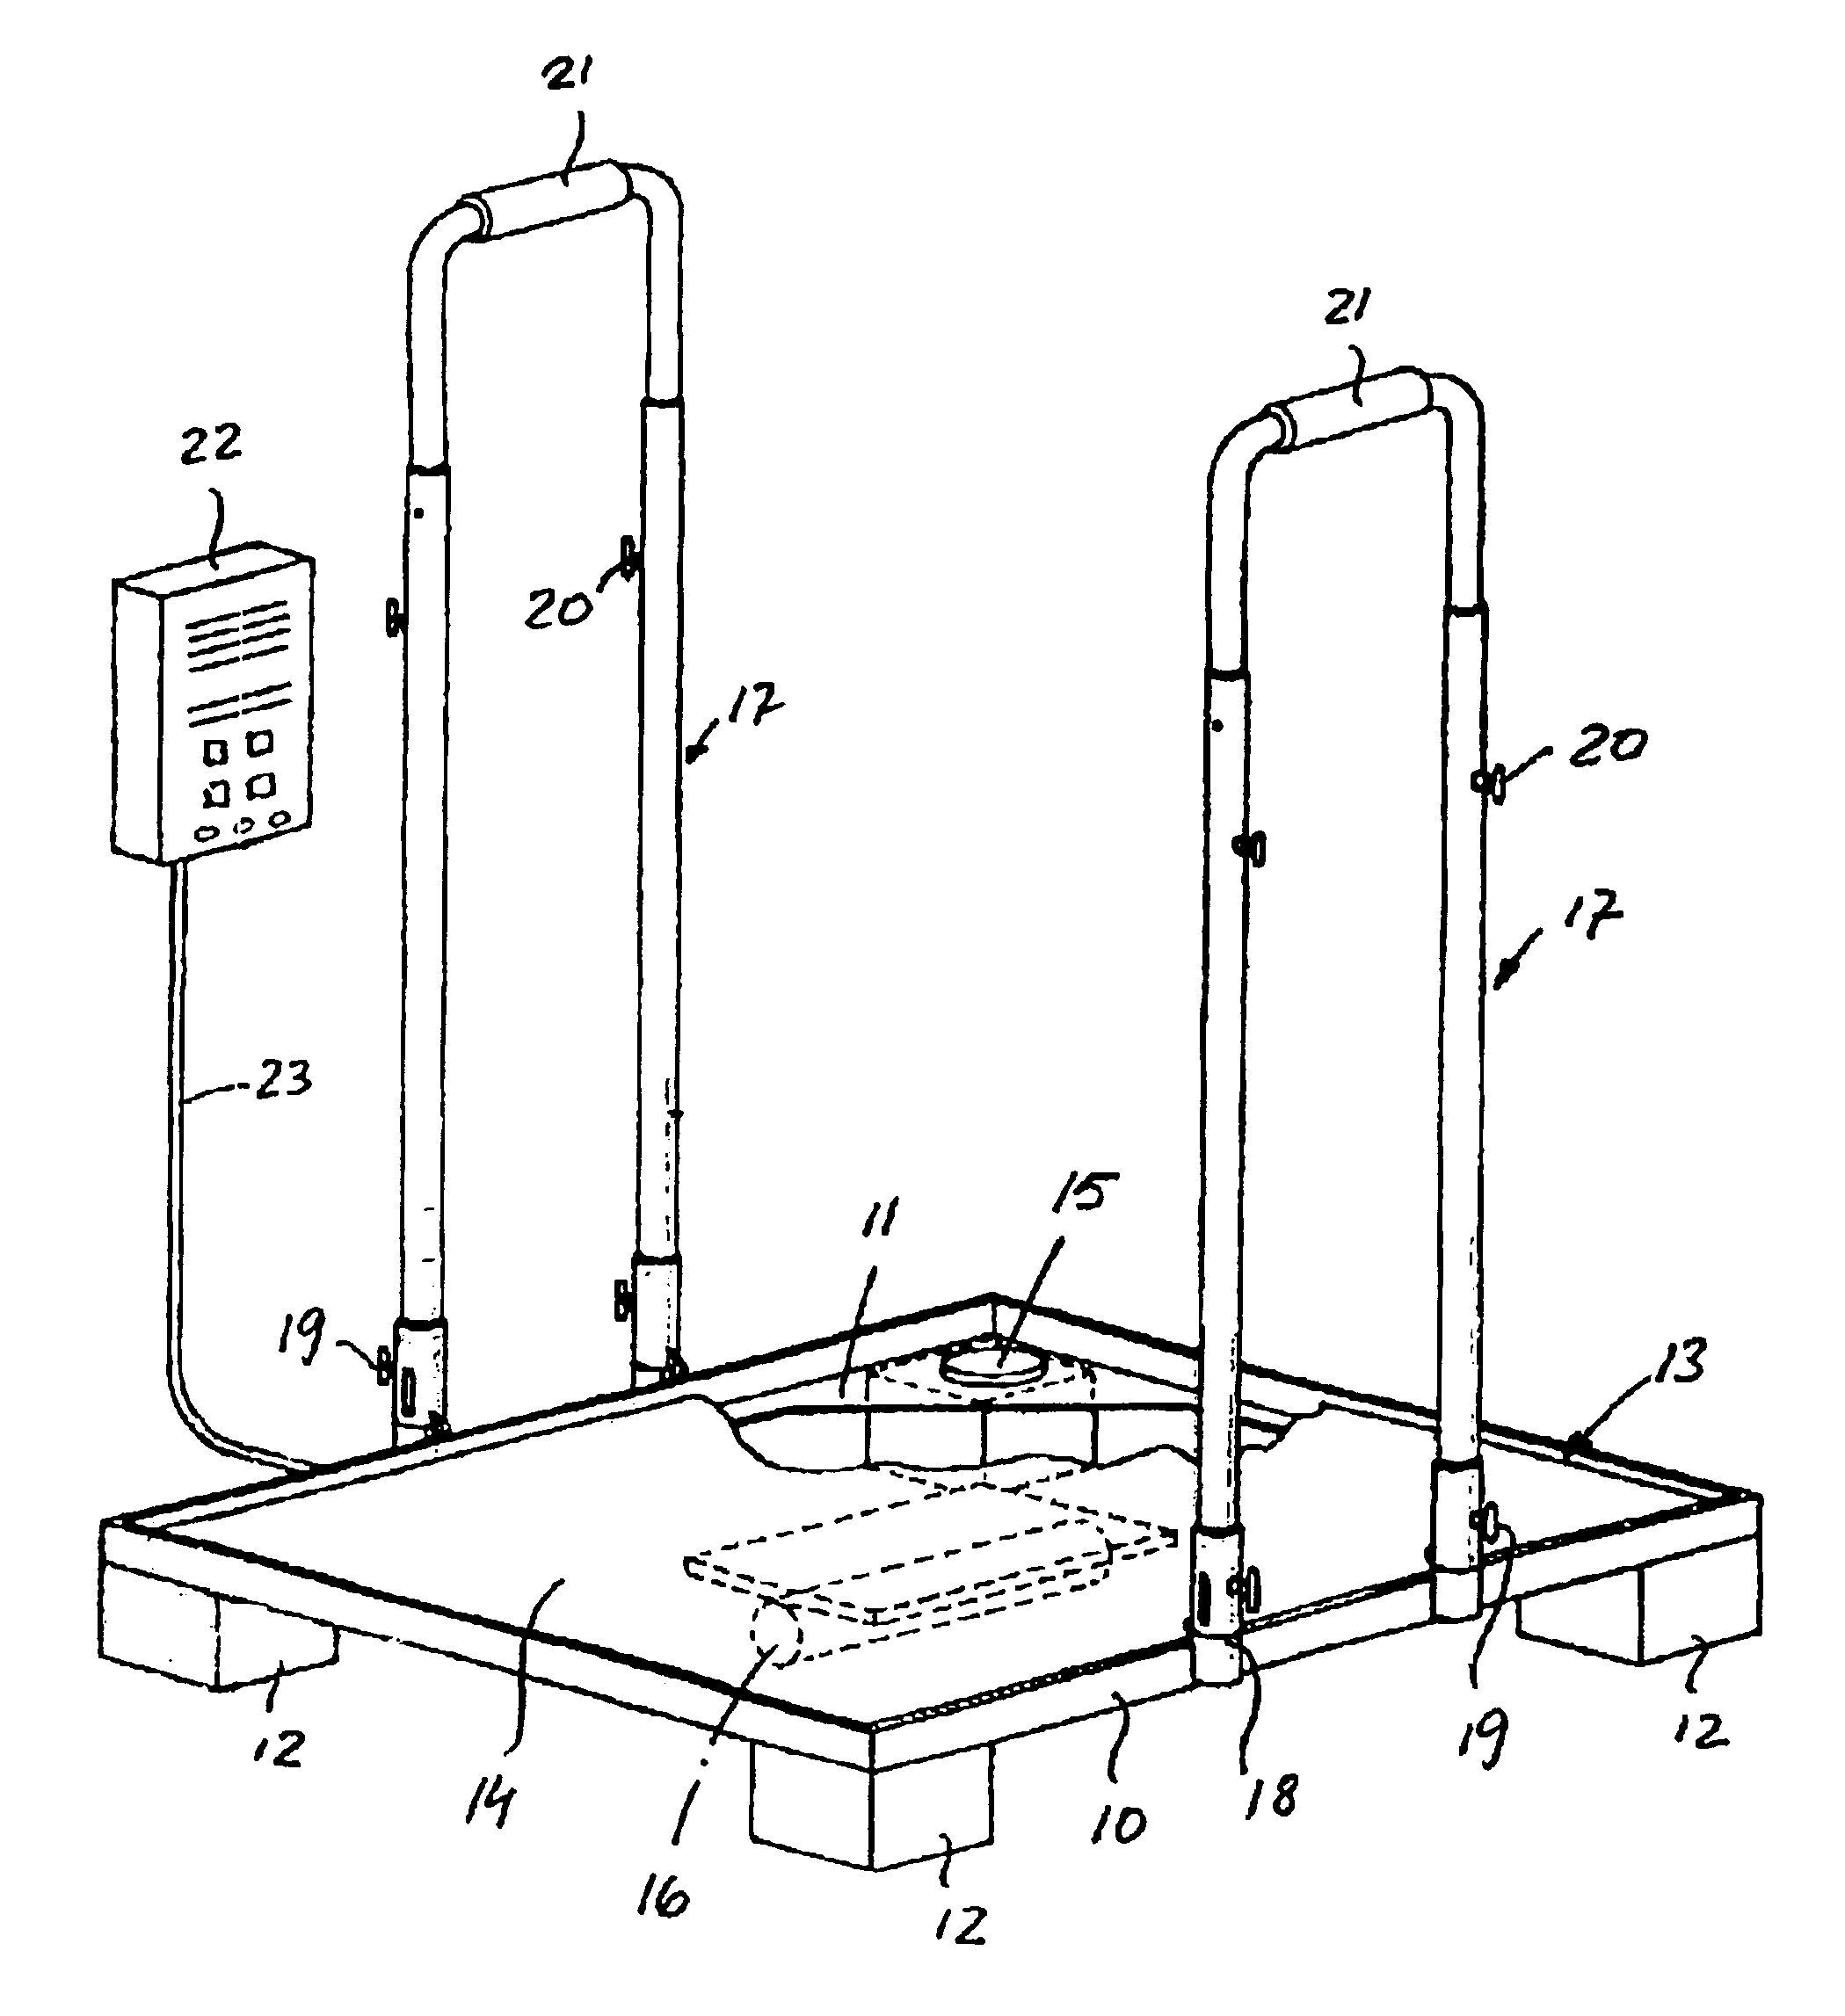 Device for vibratory stimulation on the human body